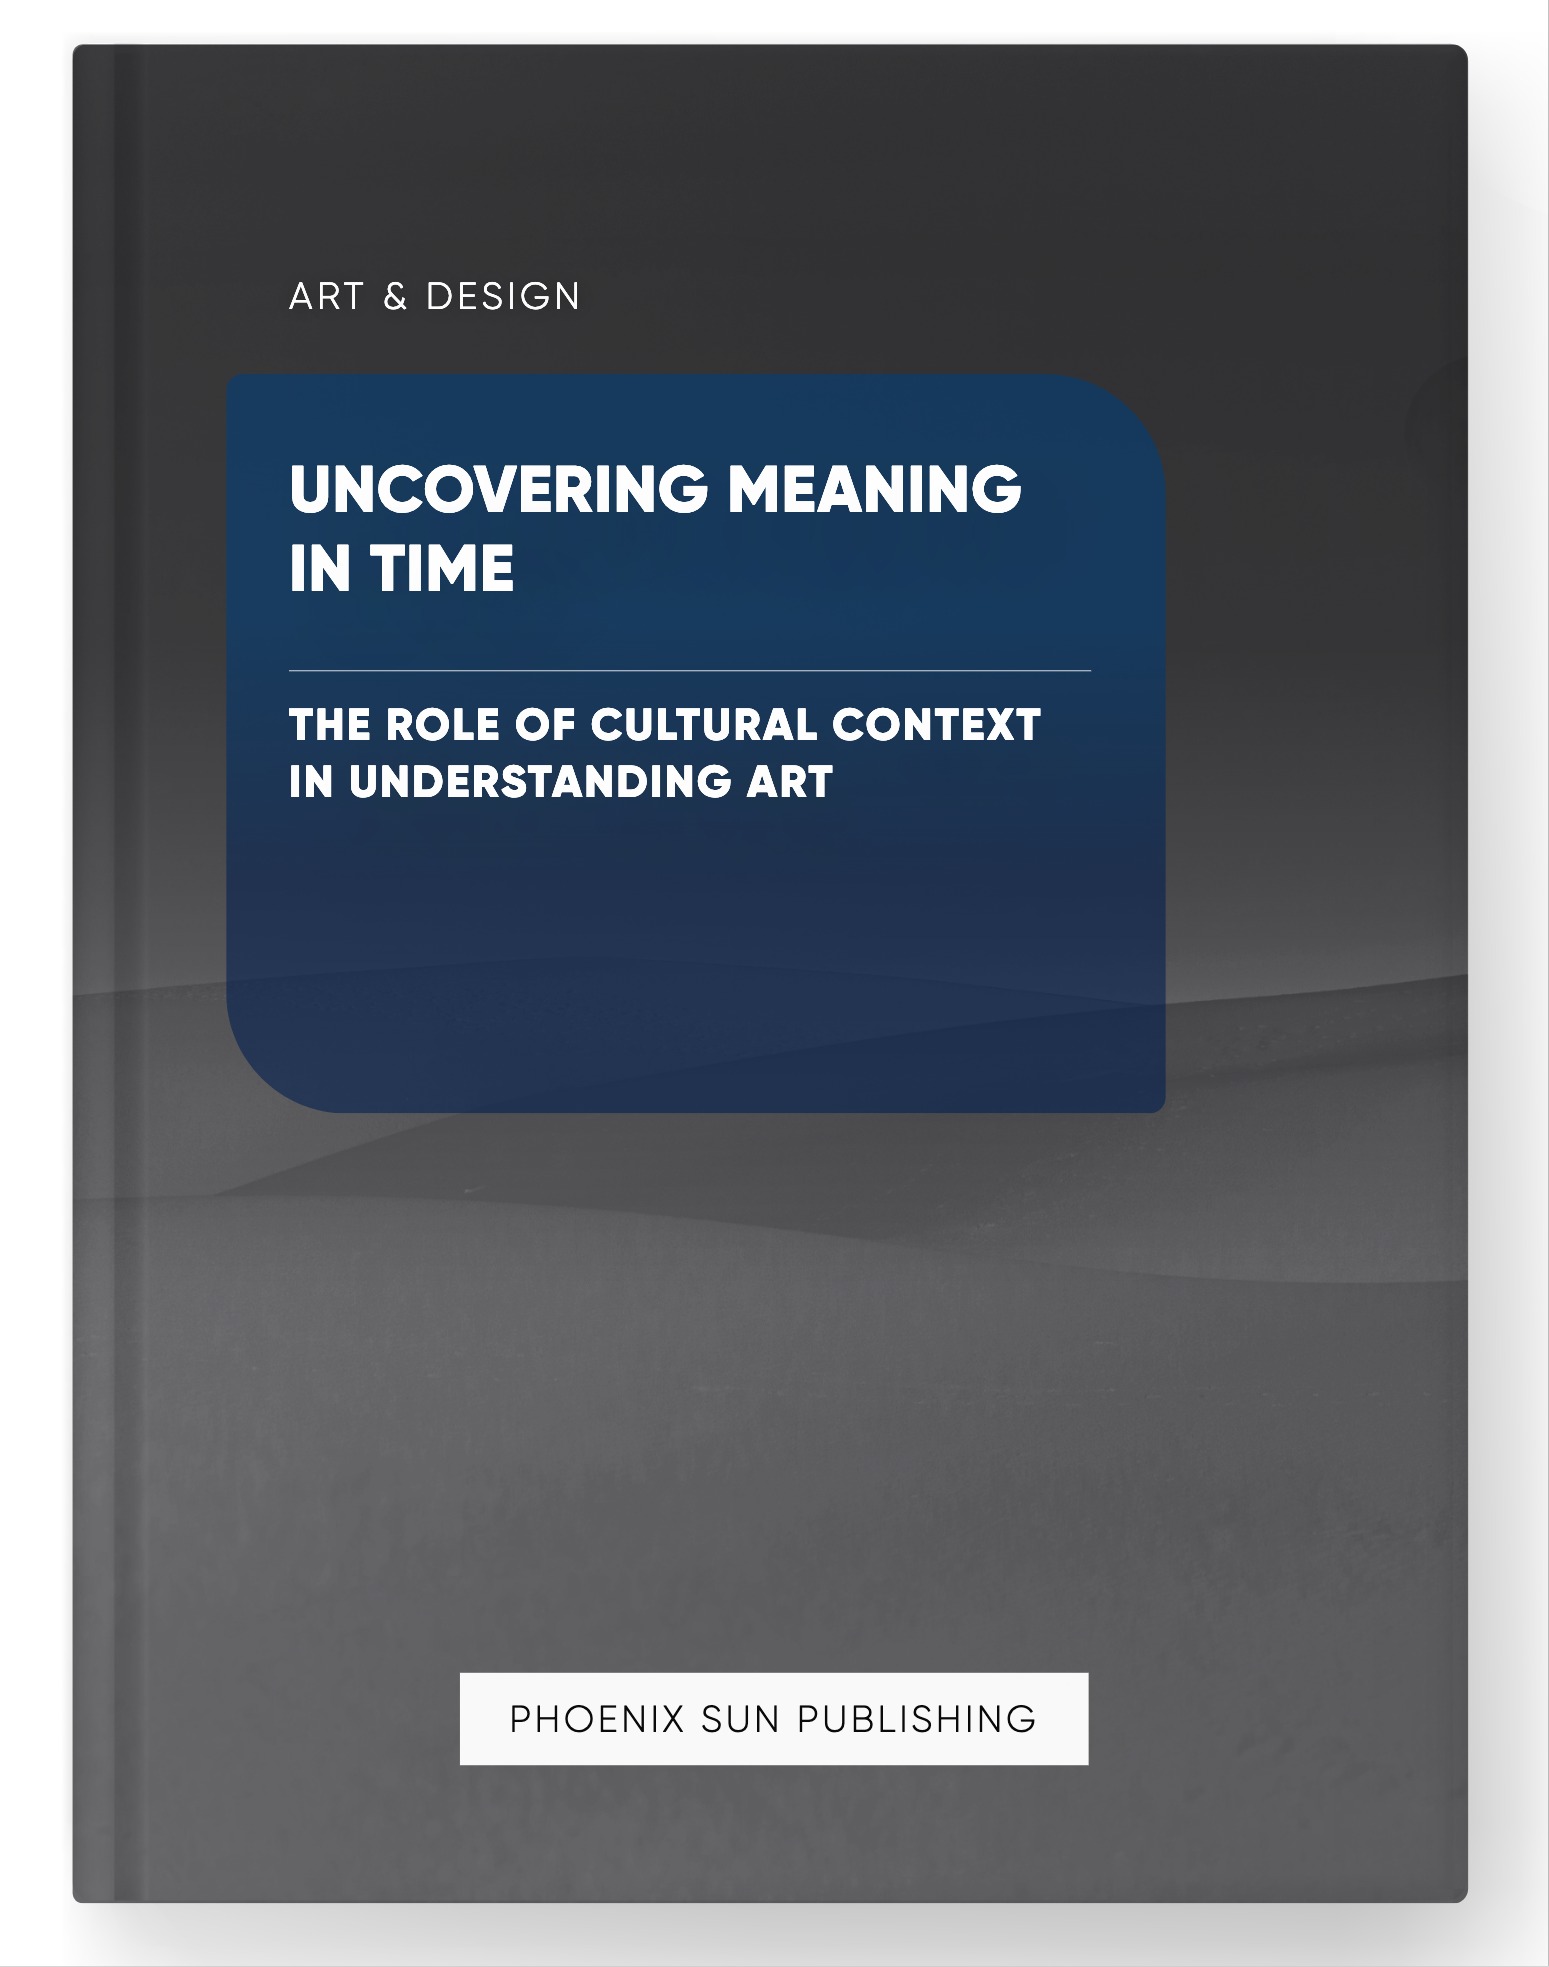 Uncovering Meaning in Time – The Role of Cultural Context in Understanding Art